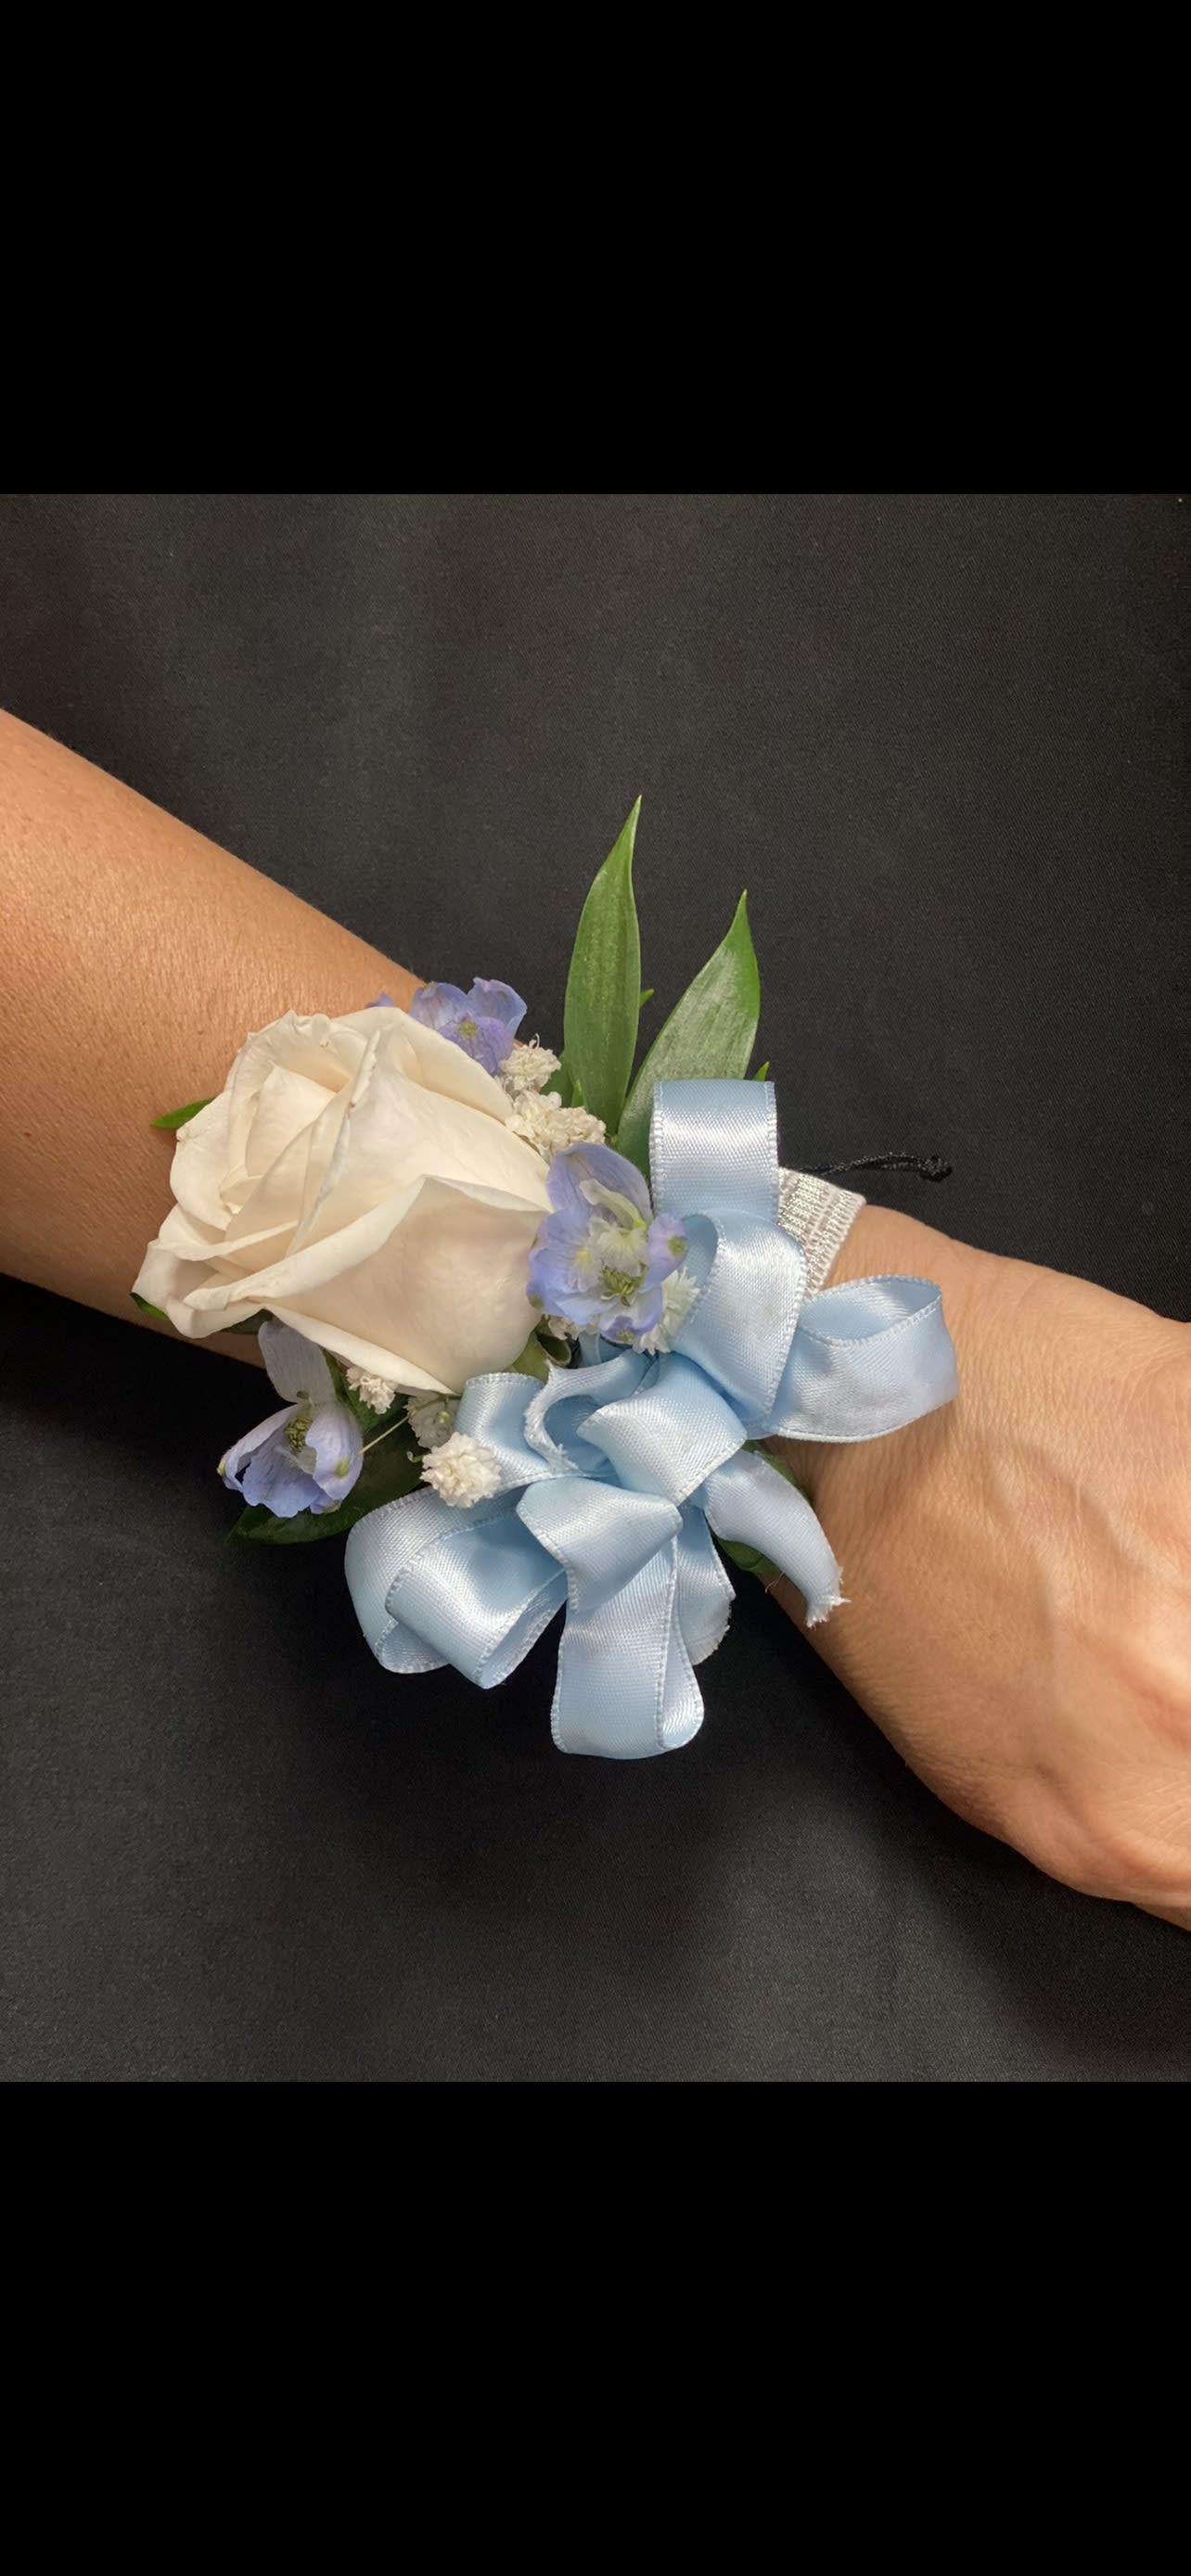 White rose corsage - SINGLE ROSE, PLEASE LET US KNOW WHAT COLOR RIBBON YOU WOULD LIKE 